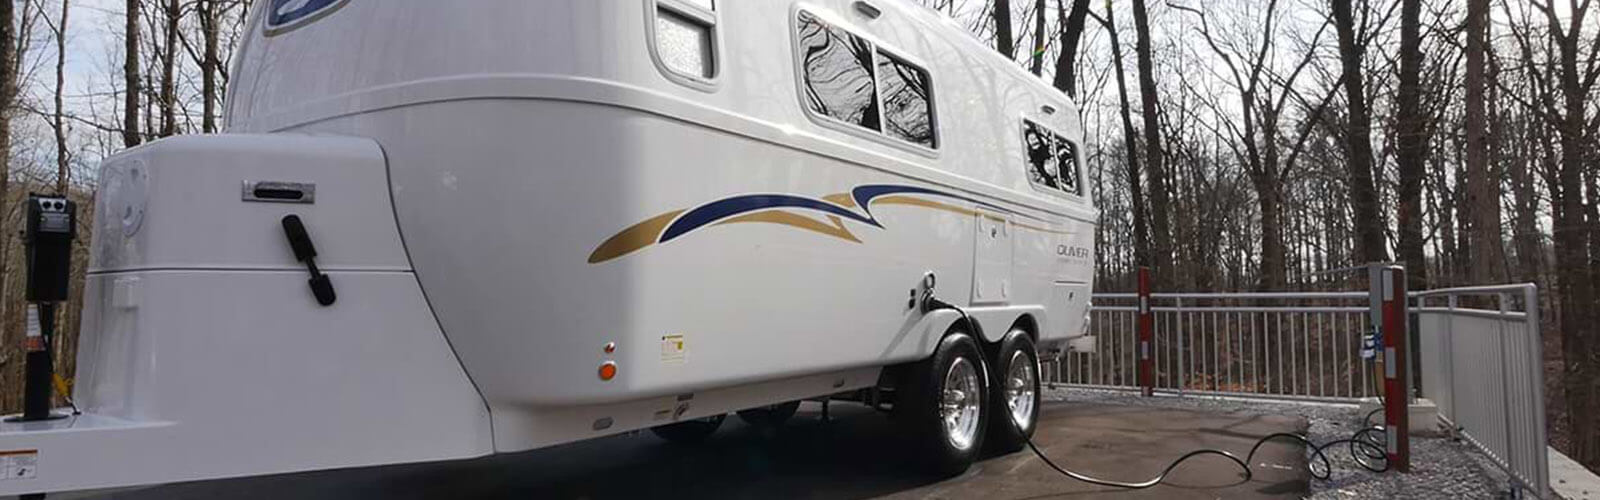 regular inspection and maintenance travel trailers